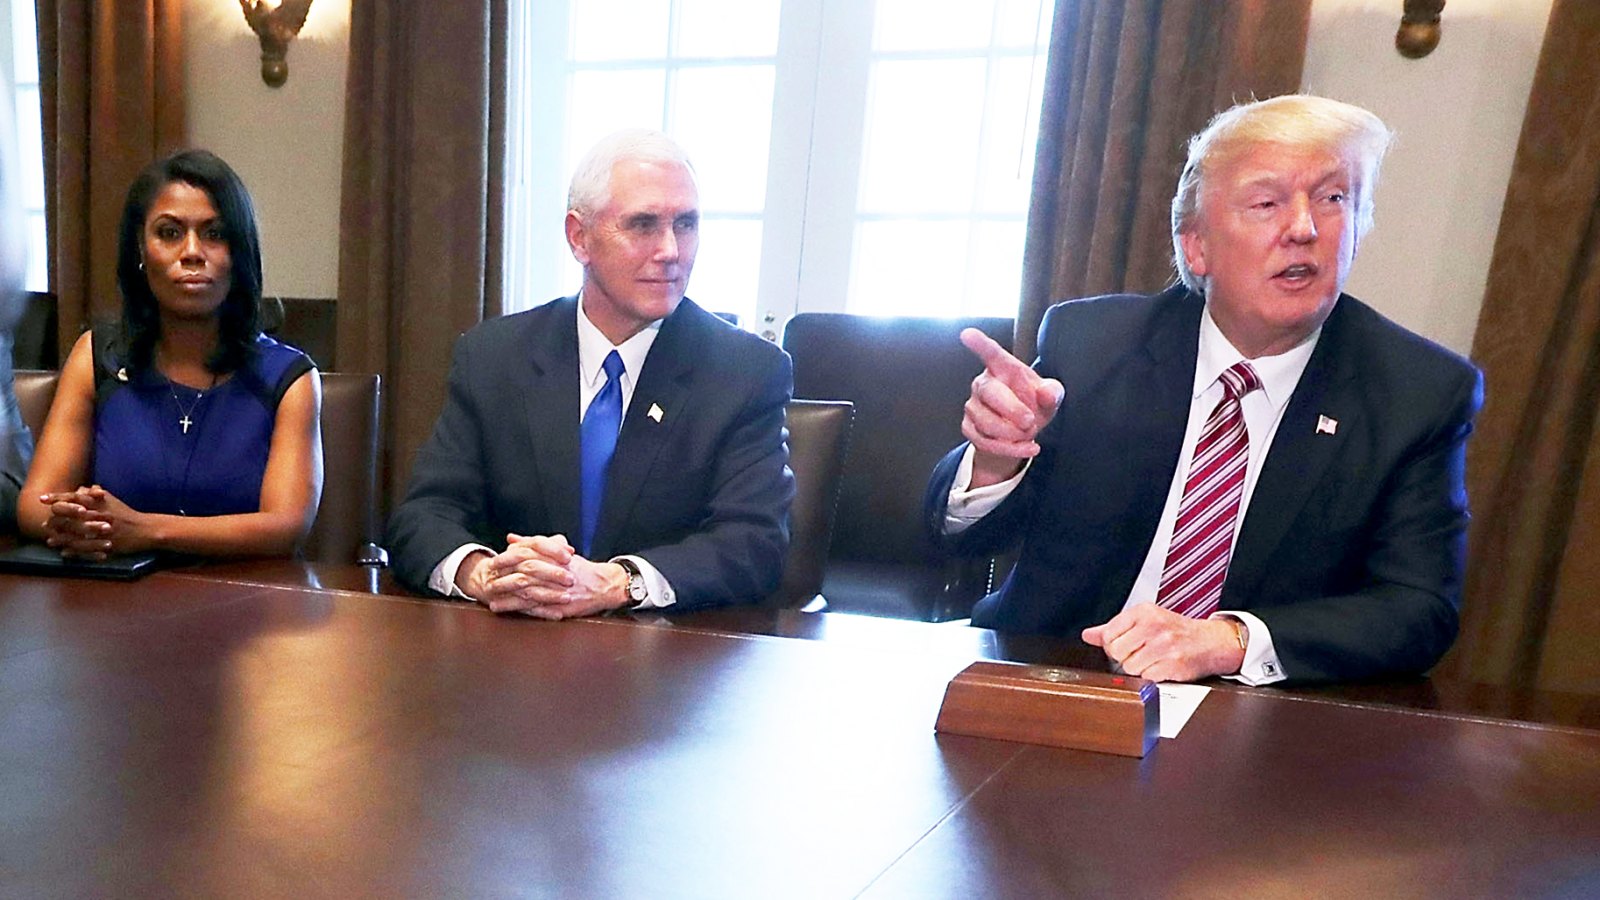 Omarosa Manigault, Mike Pence and Donald Trump during a meeting with the Congressional Black Caucus Executive Committee in the Cabinet Room at the White House March 22, 2017 in Washington, DC.